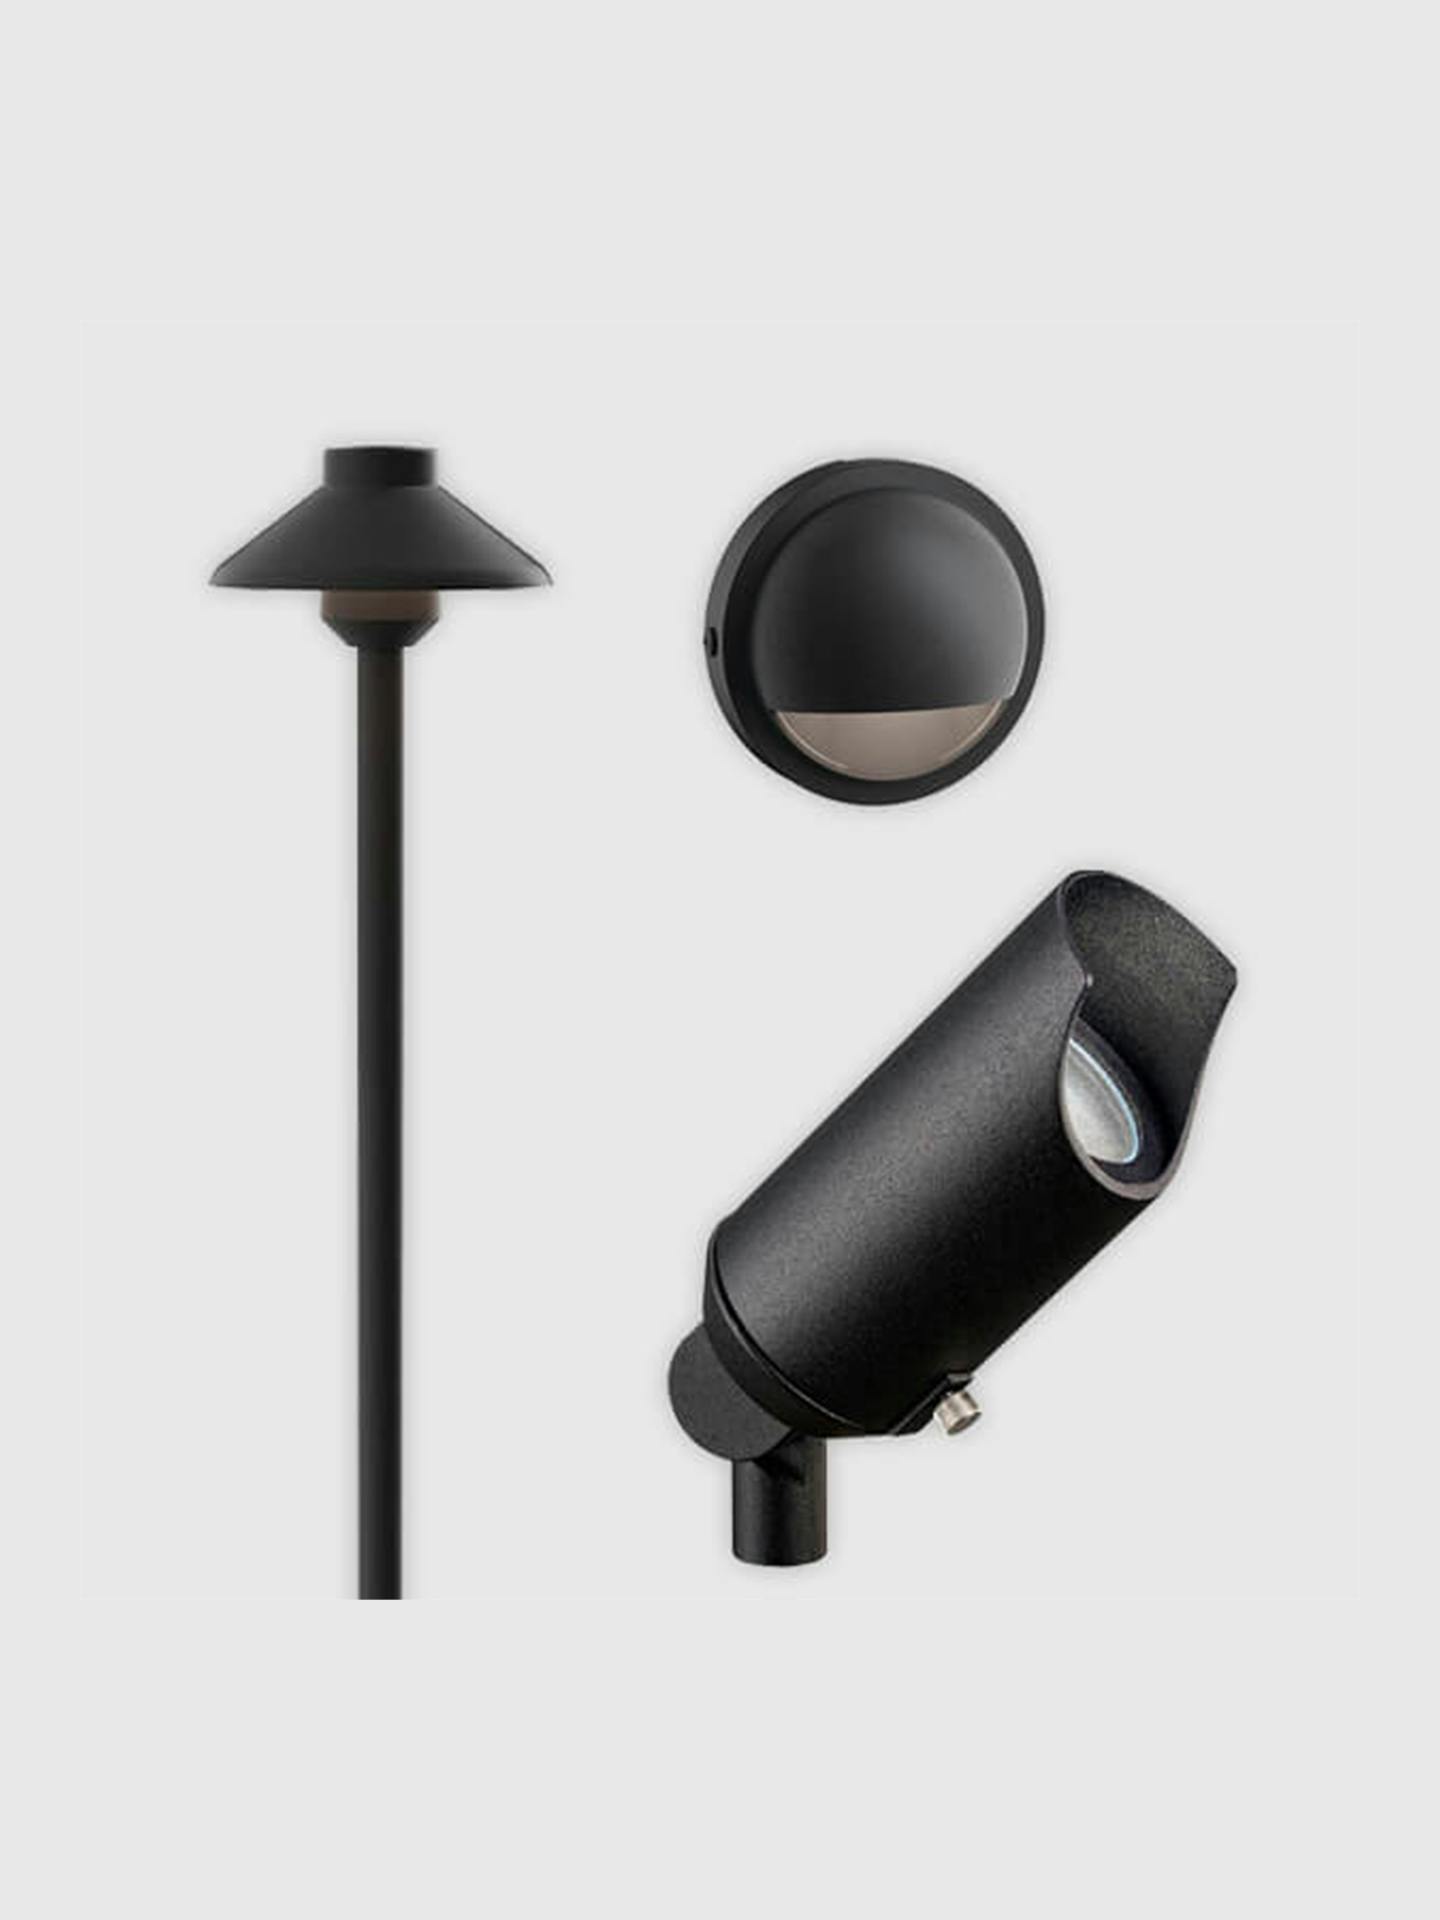 Variety of black finished path lights